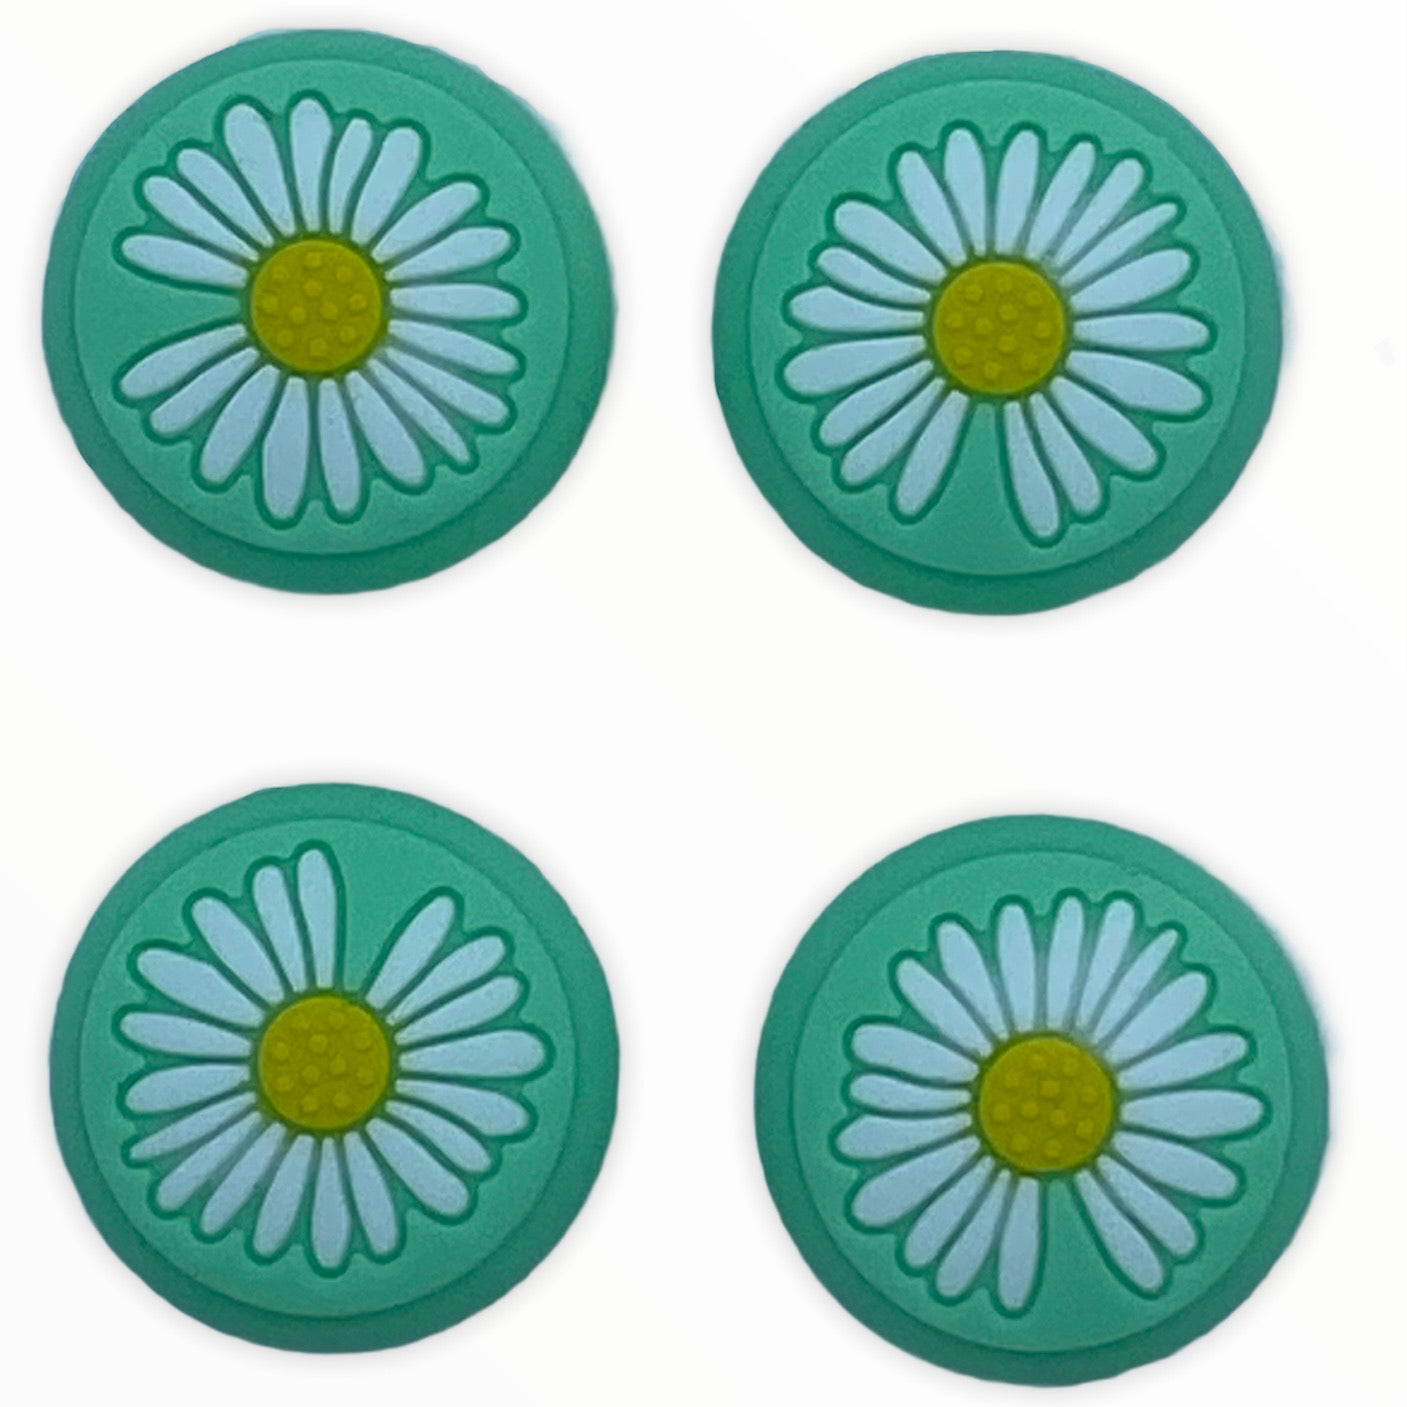 JenDore Green 4Pcs Flower Silicone Thumb Grip Caps for Nintendo Switch